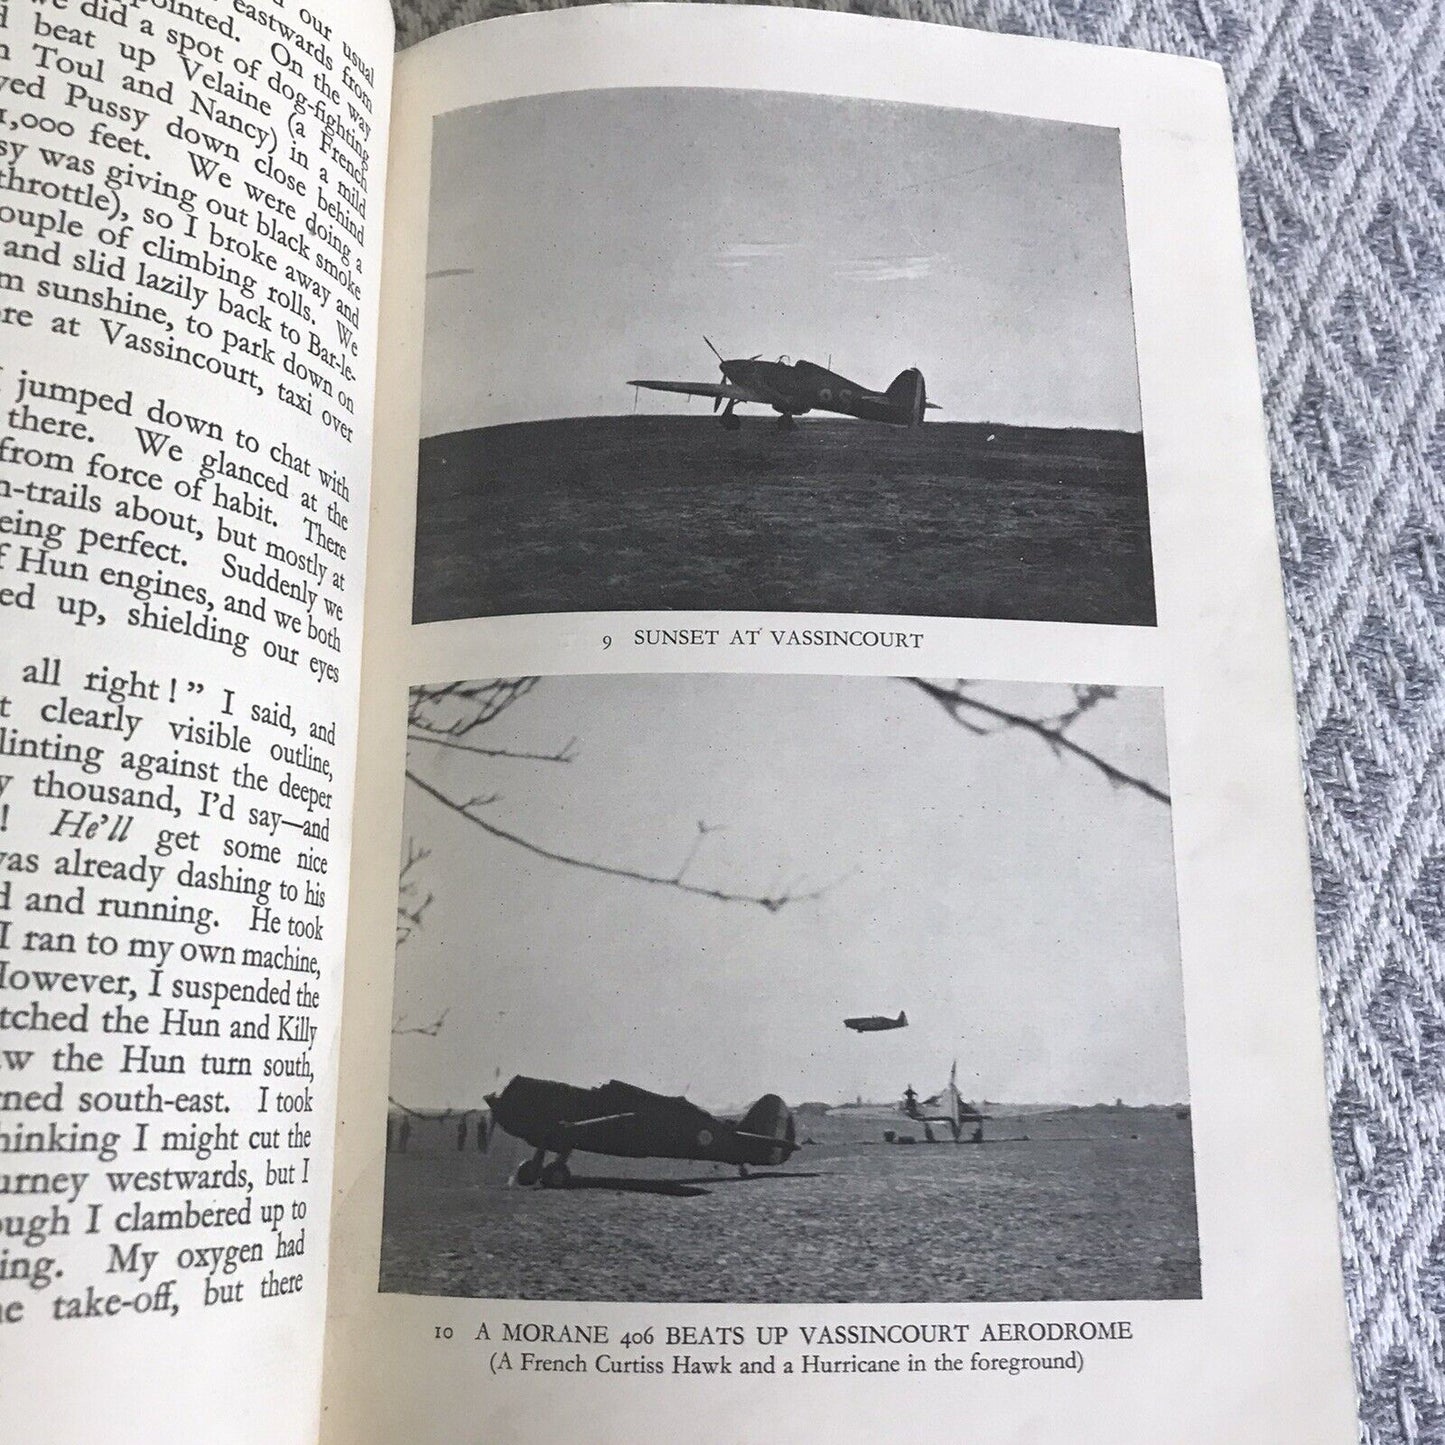 1941 Fighter Pilot A Personal Record Of The Campaign In France 1939-1940 - B. T. Honeyburn Books (UK)